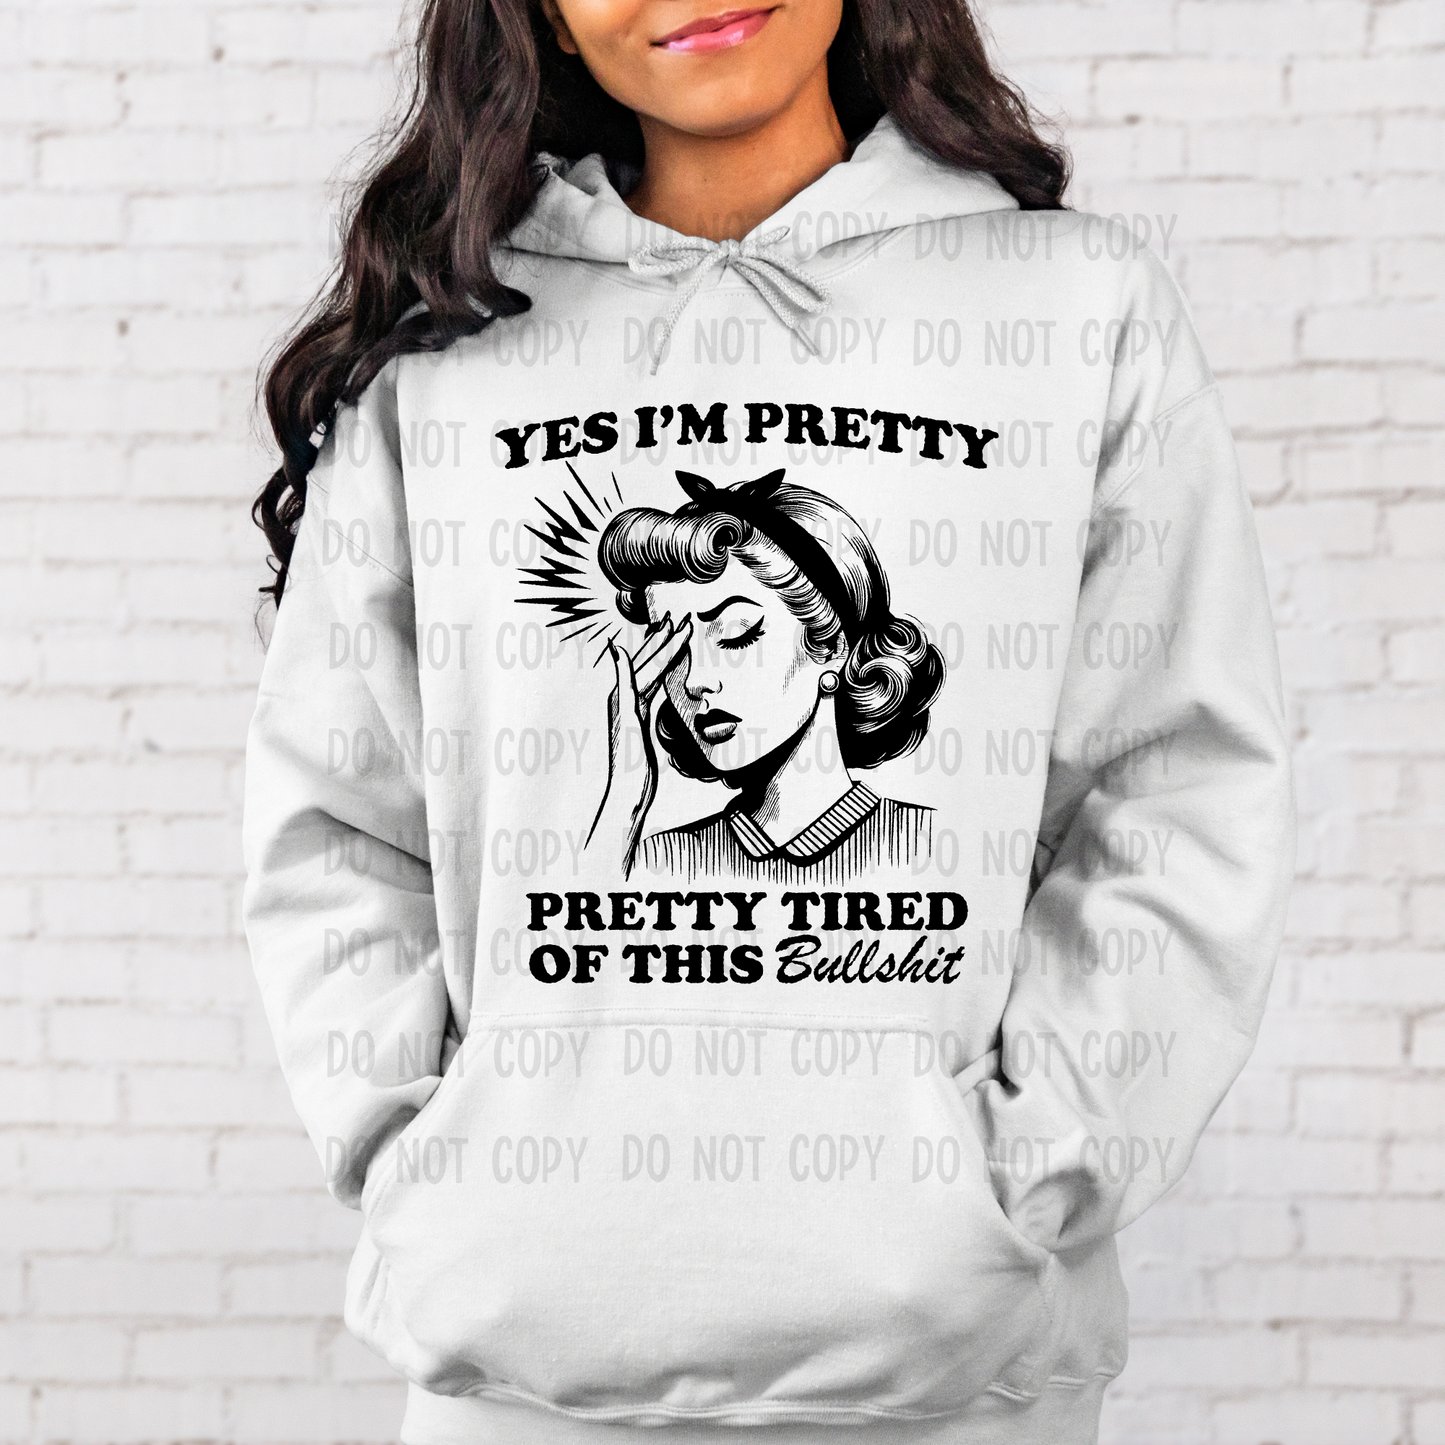 Yes I'm pretty - DTF